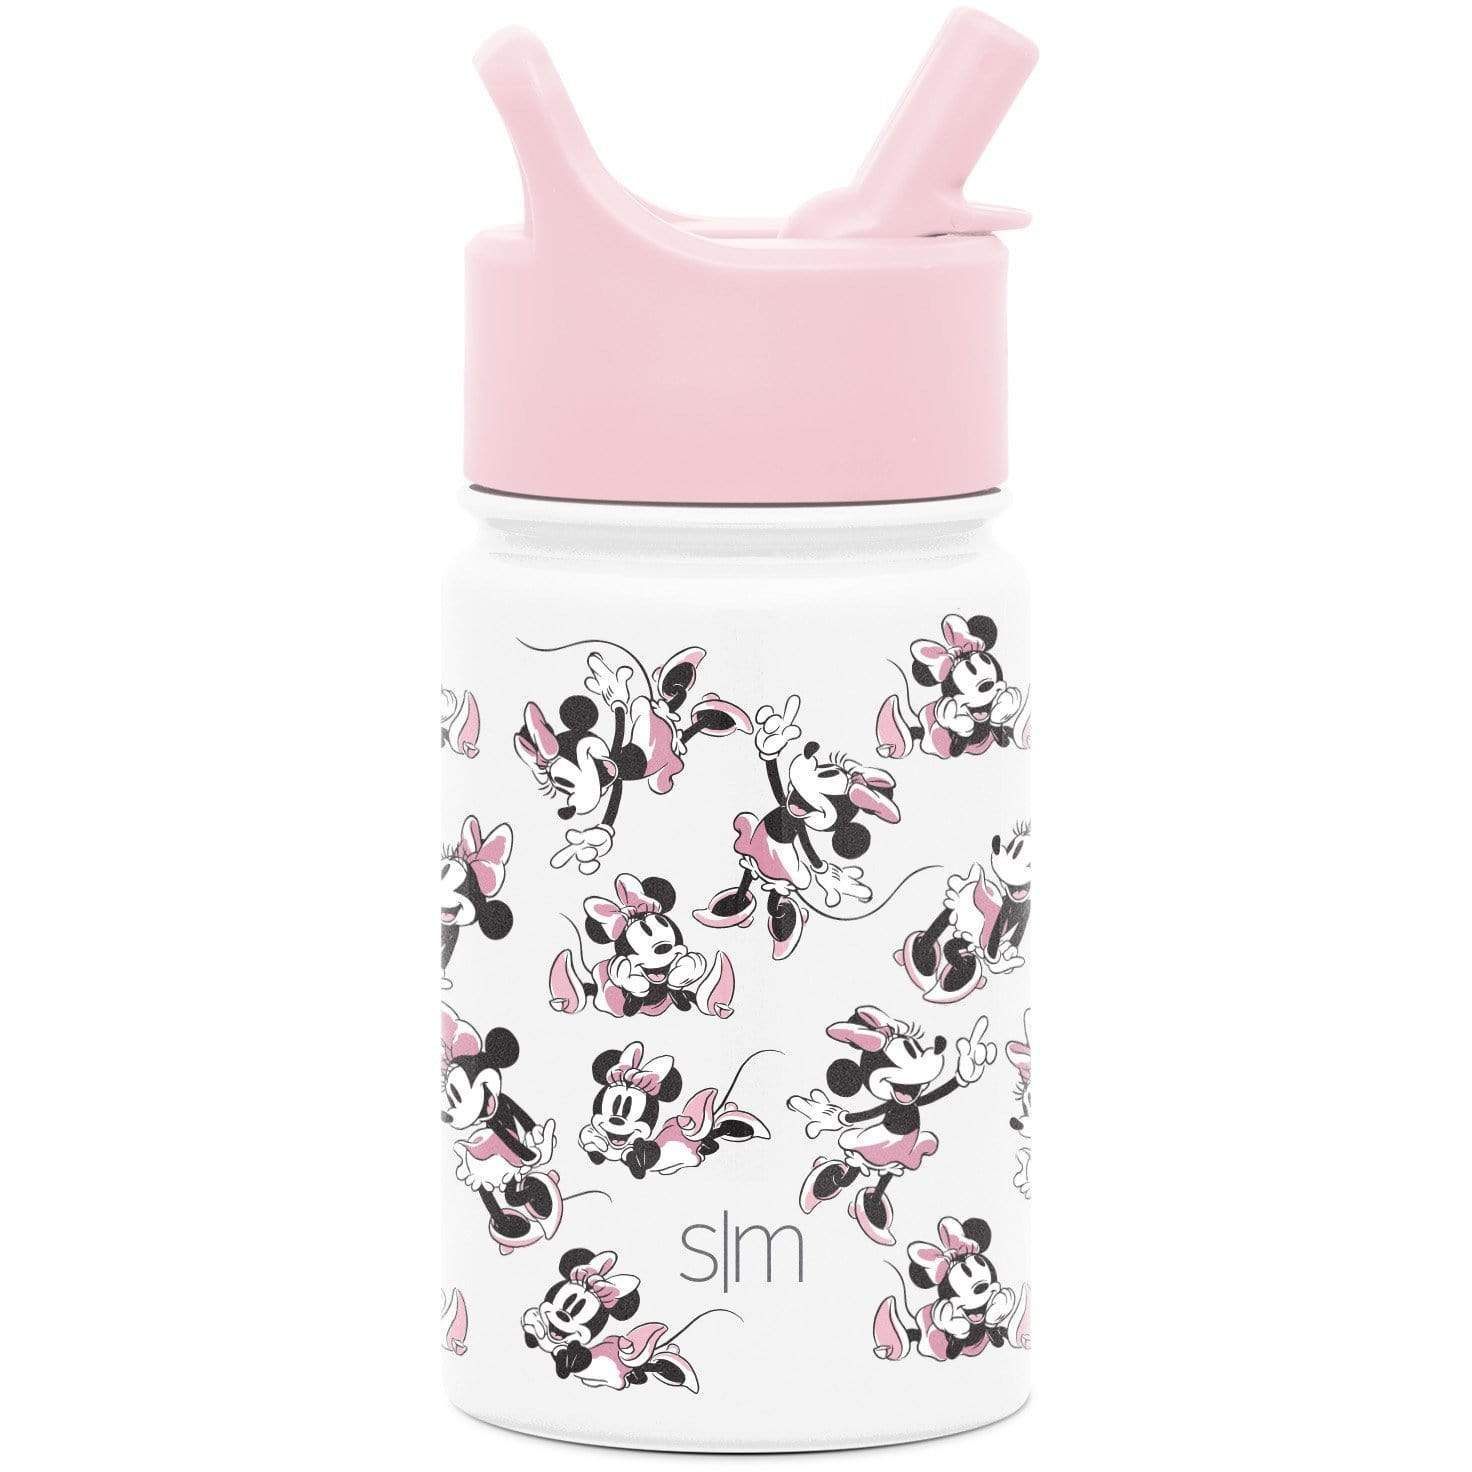 https://disneyfashionblog.com/wp-content/uploads/2020/09/simple-modern-branded-new-summit-water-bottle-with-straw-lid-disney-minnie-mouse-retro-summit-kids-water-bottle-with-straw-lid-10oz-summit-kids-stainless-steel-water-bottle-with-straw.jpg